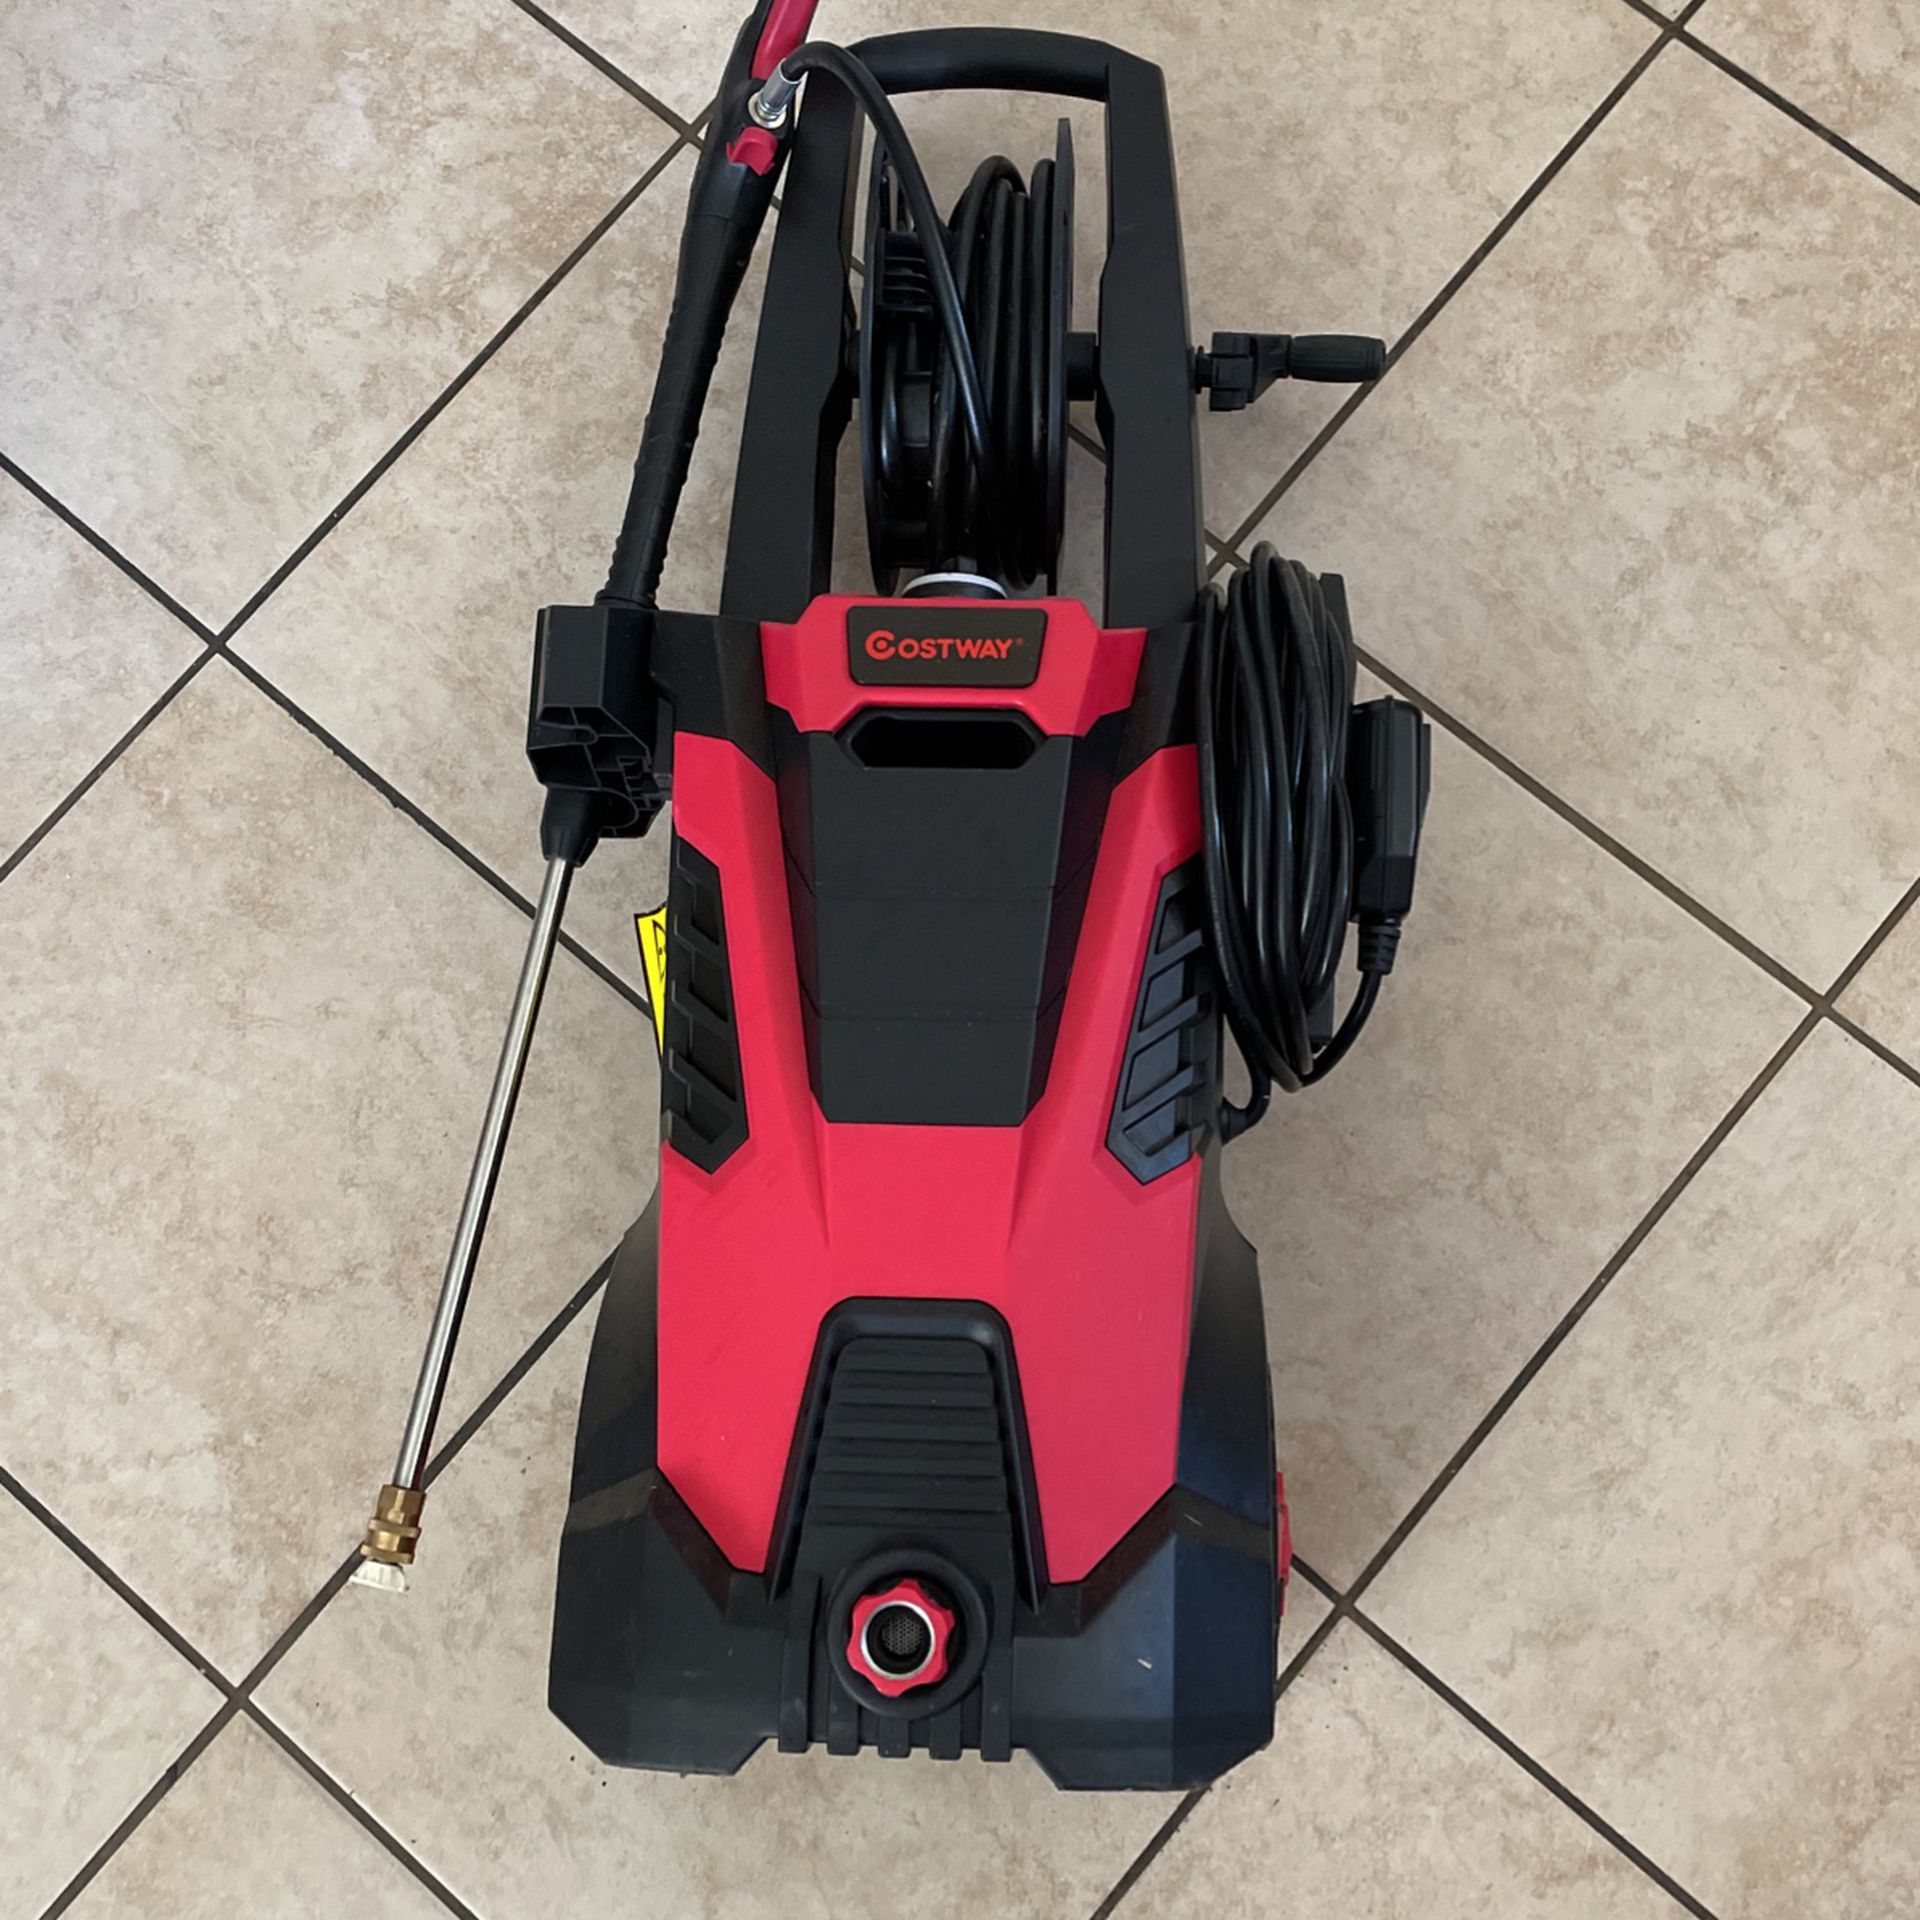 Costway 3500 PSI - Electric Pressure Washer